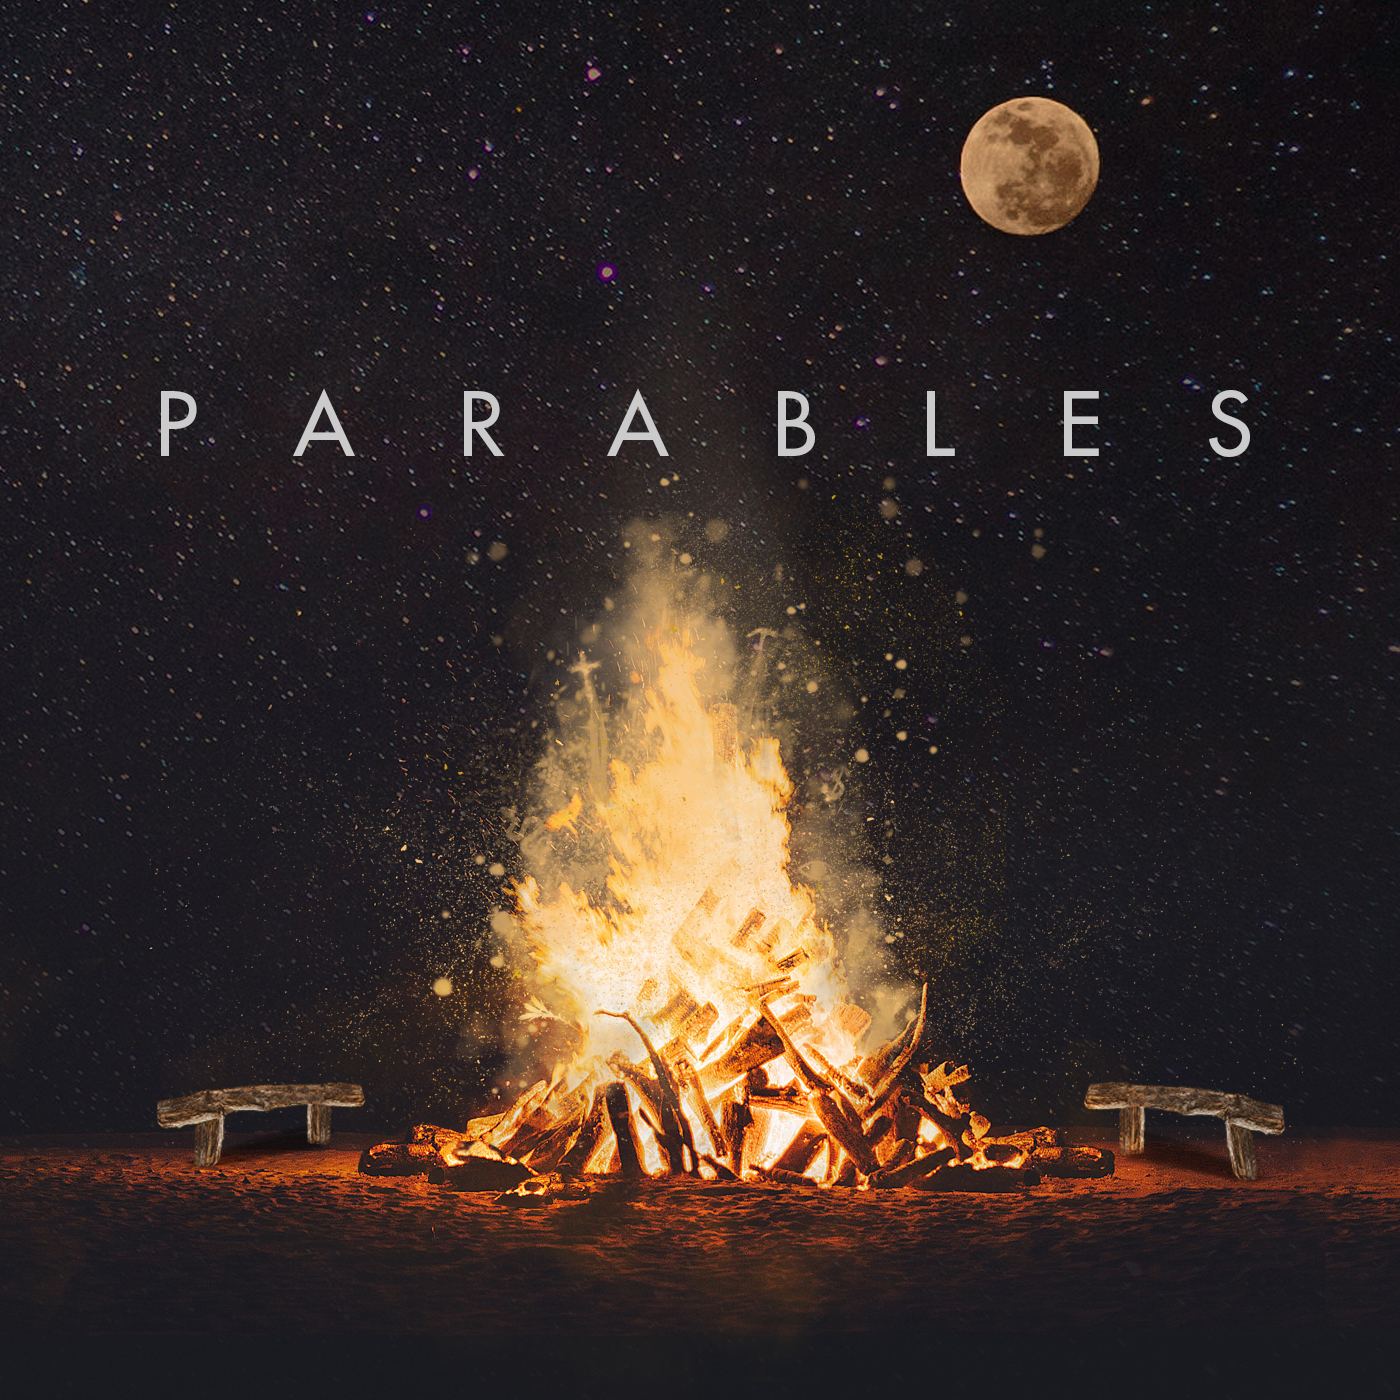 Parables - The Awkward Dinner - Chris Wall - 11-17-2019